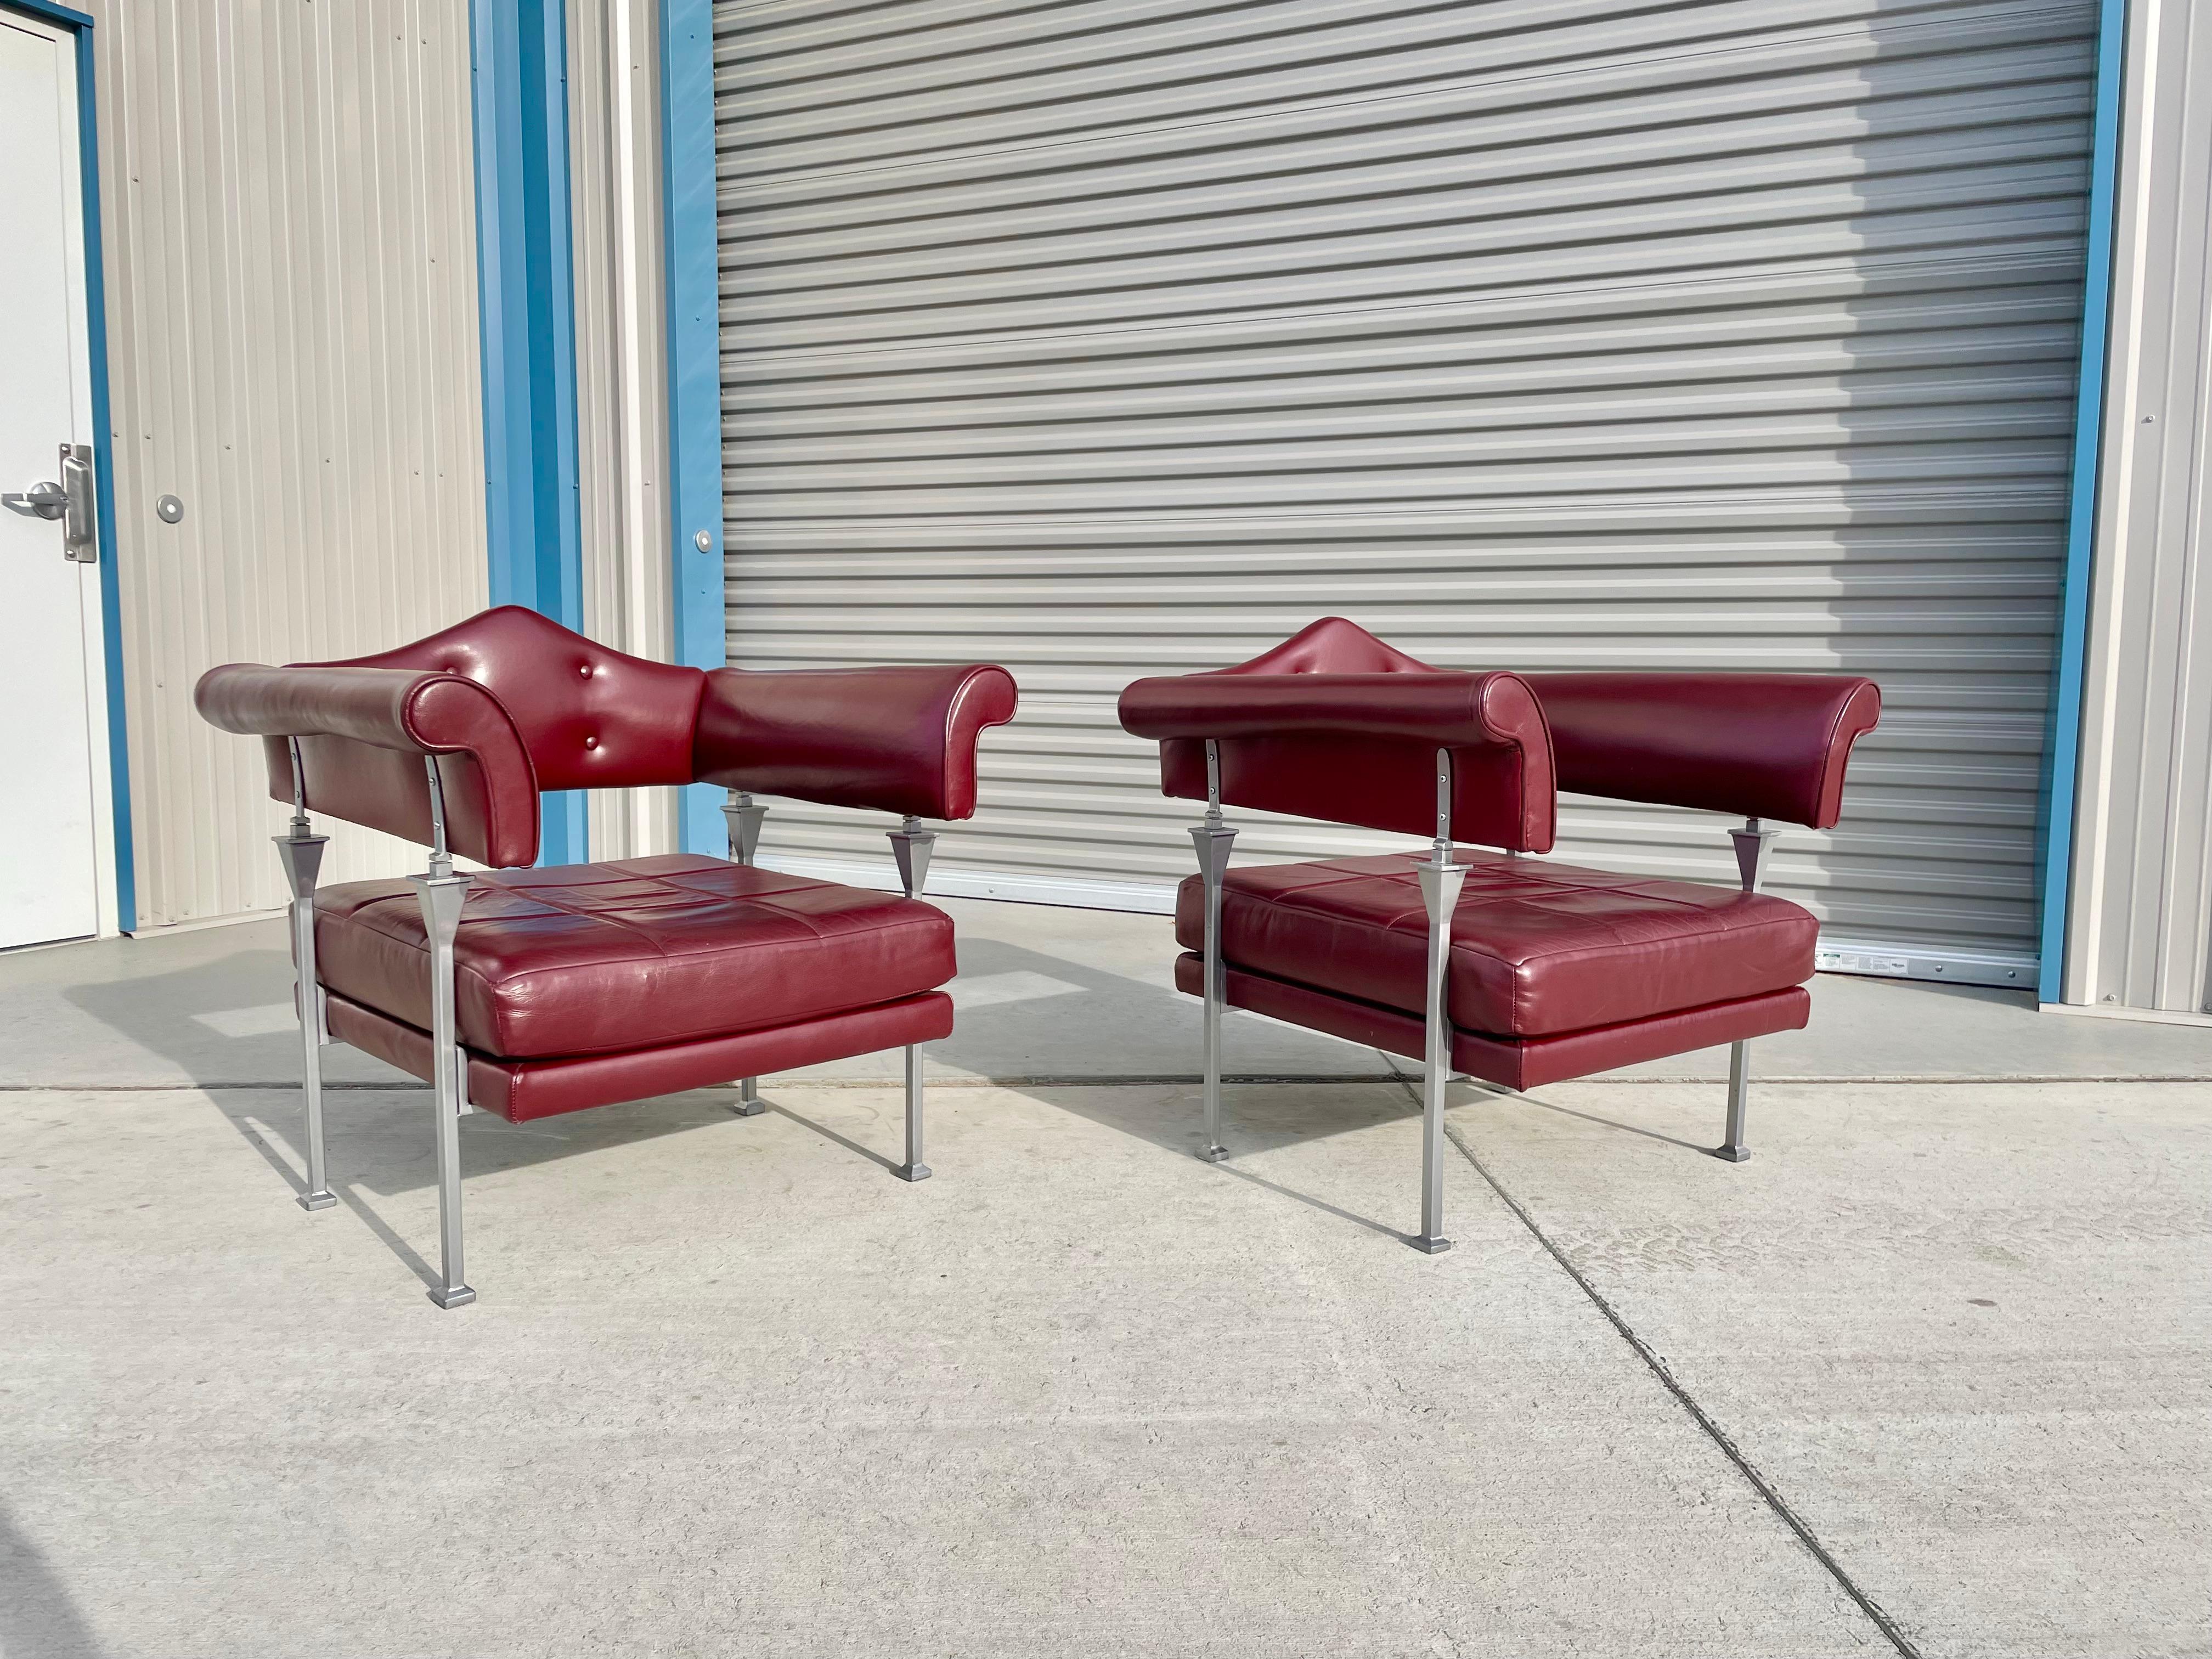 Mid-century modern pair of leather armchairs was designed by Luca Scacchetti and manufactured by Poltrona Frau in Italy circa the 1990s. These beautiful lounge chairs feature red leather tufted backrests with a unique metal base, making them the